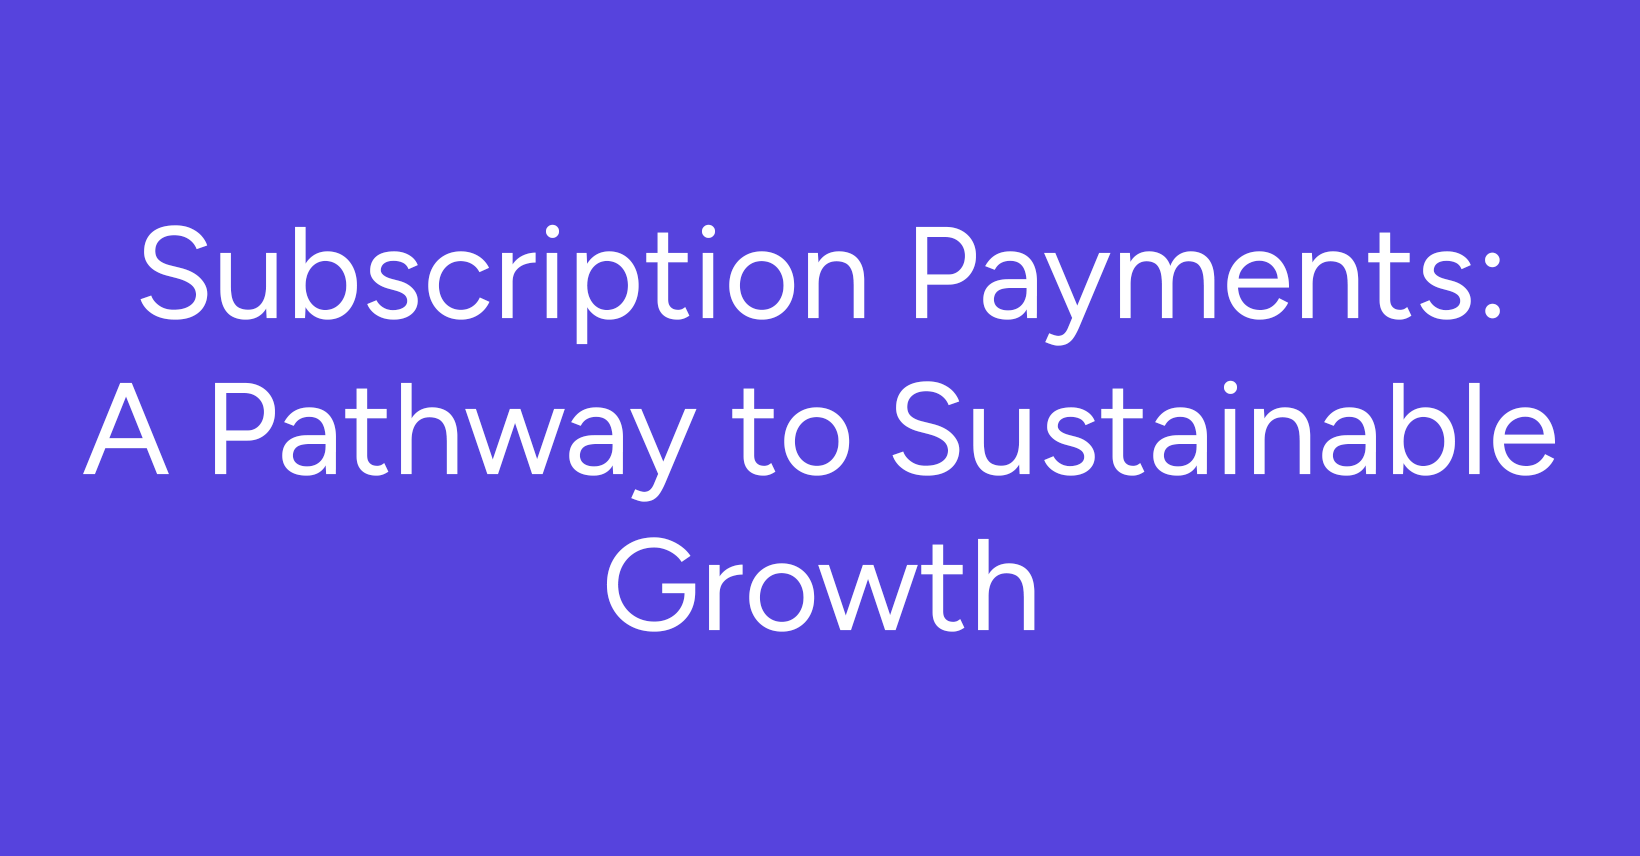 Embracing Subscription Payments in the Digital Era: A Pathway to Sustainable Growth